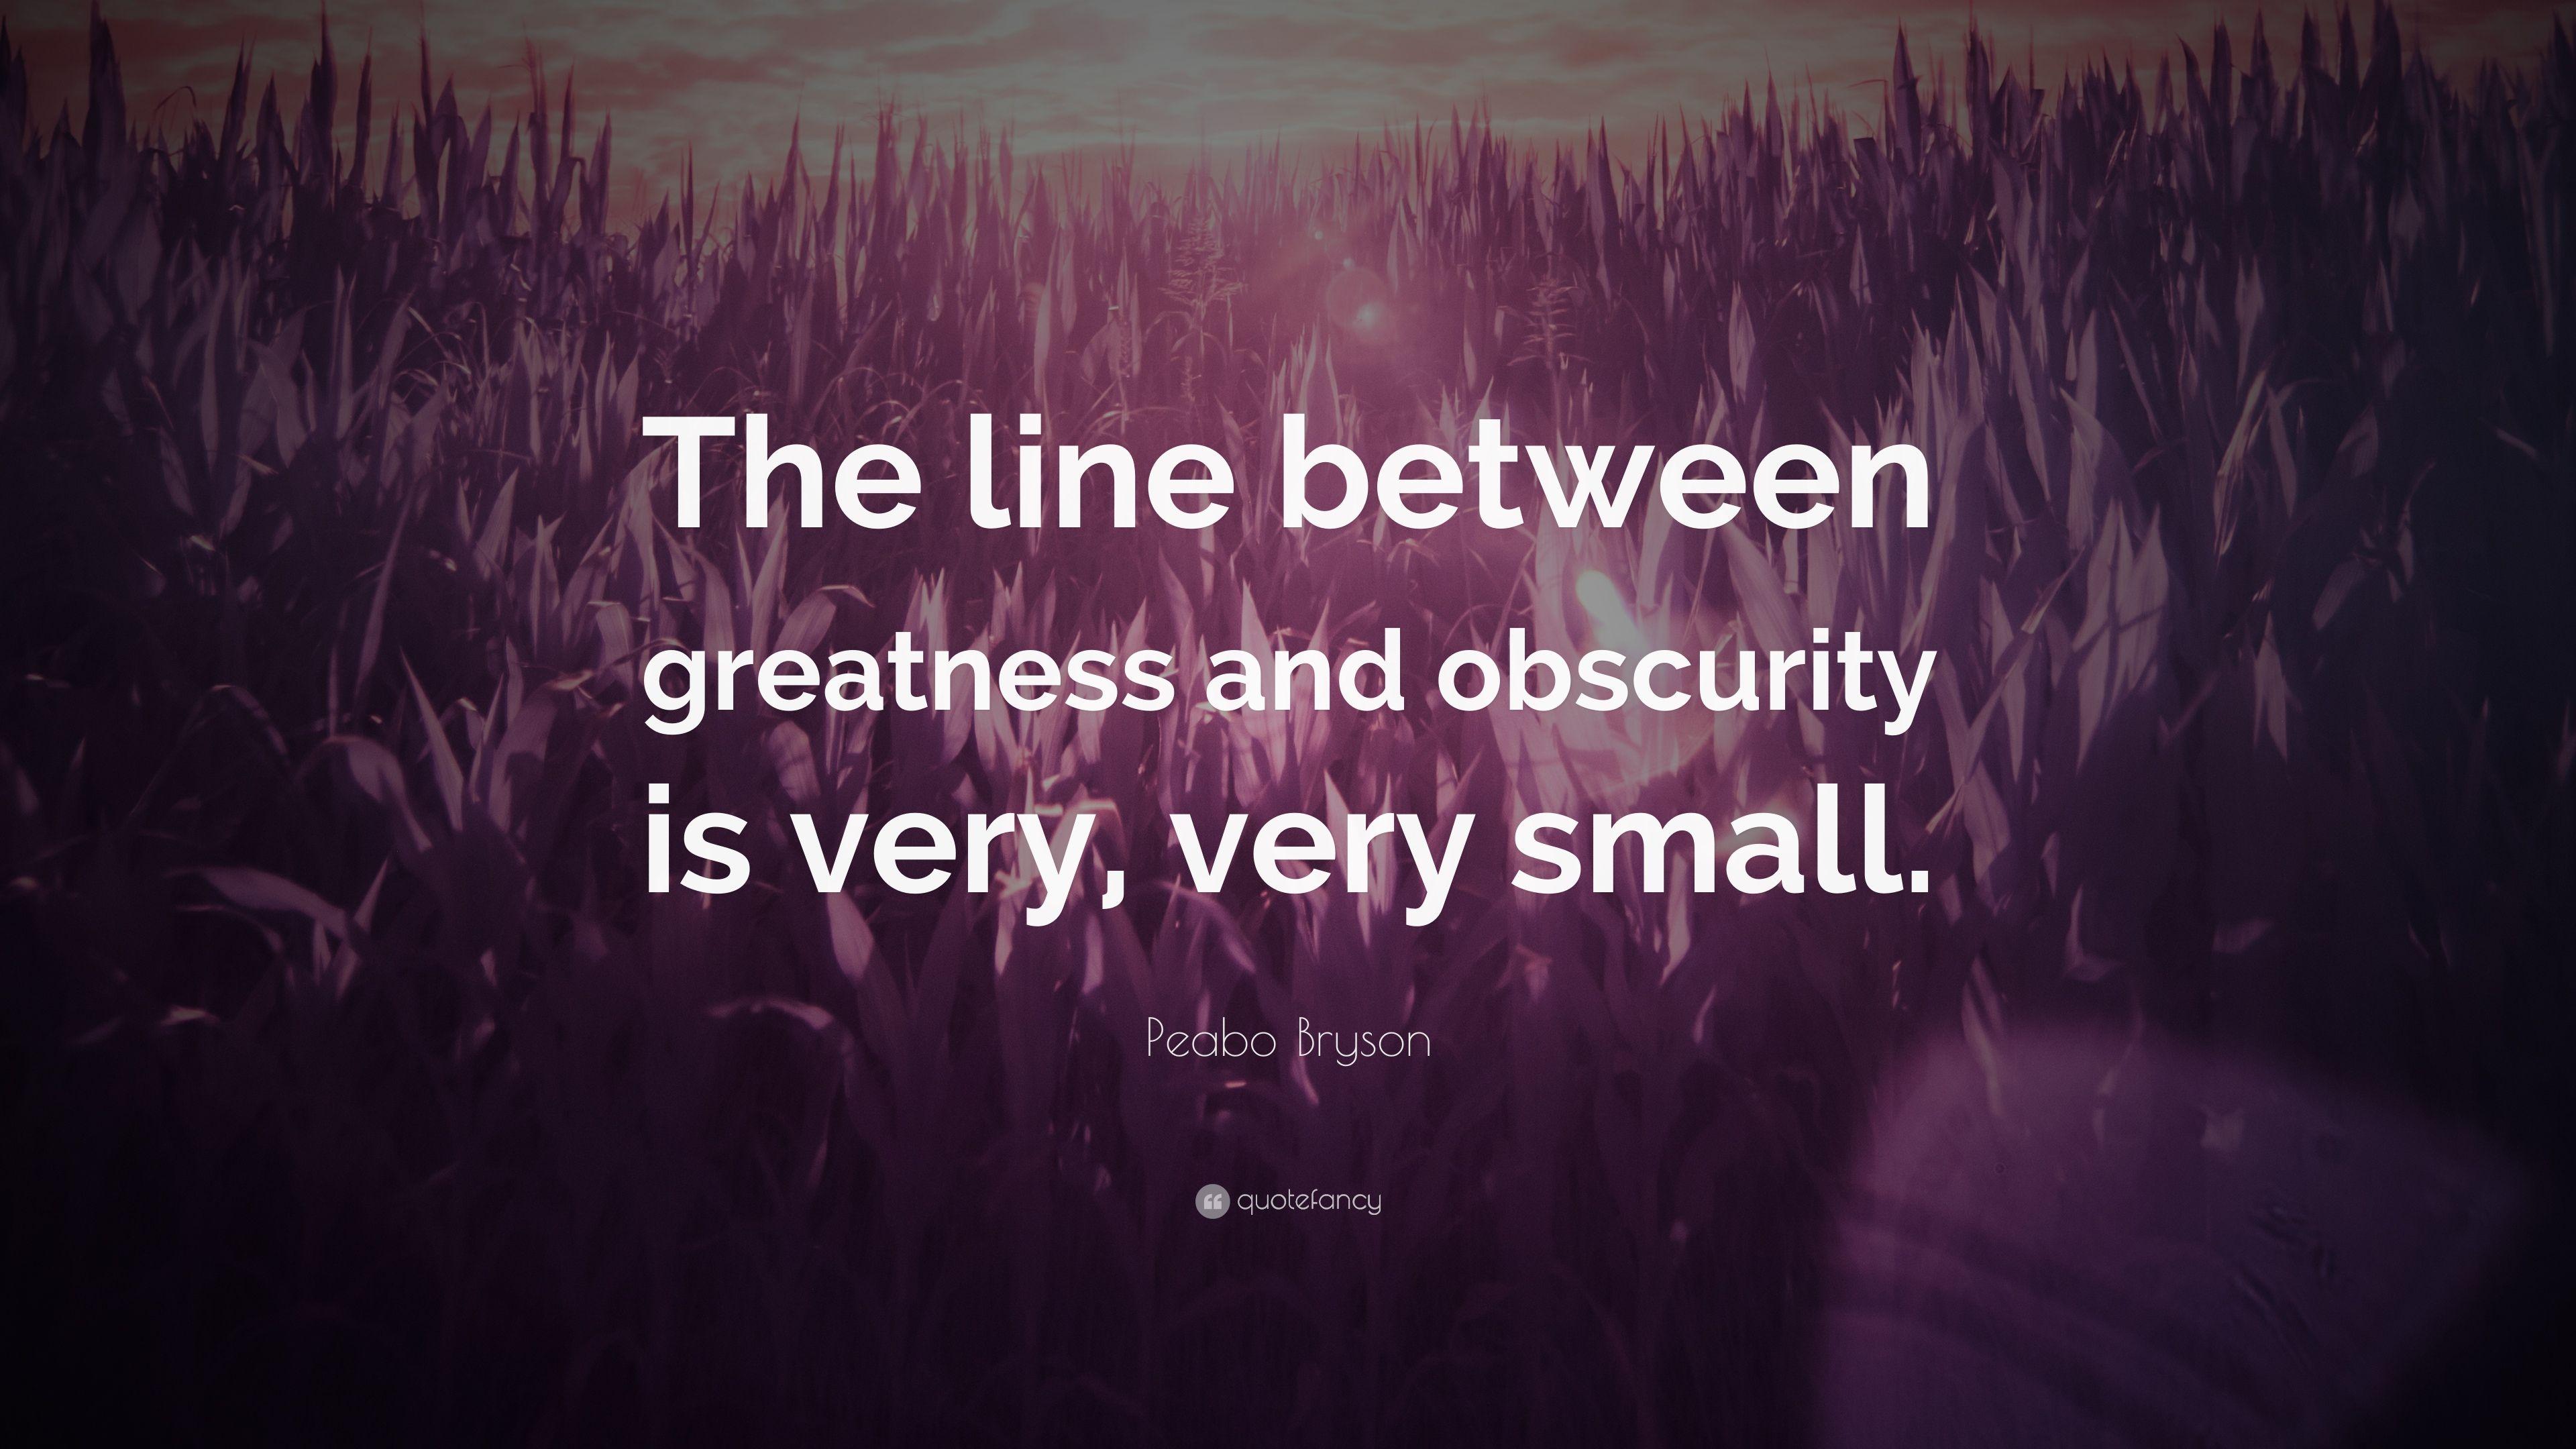 Peabo Bryson Quote: “The line between greatness and obscurity is